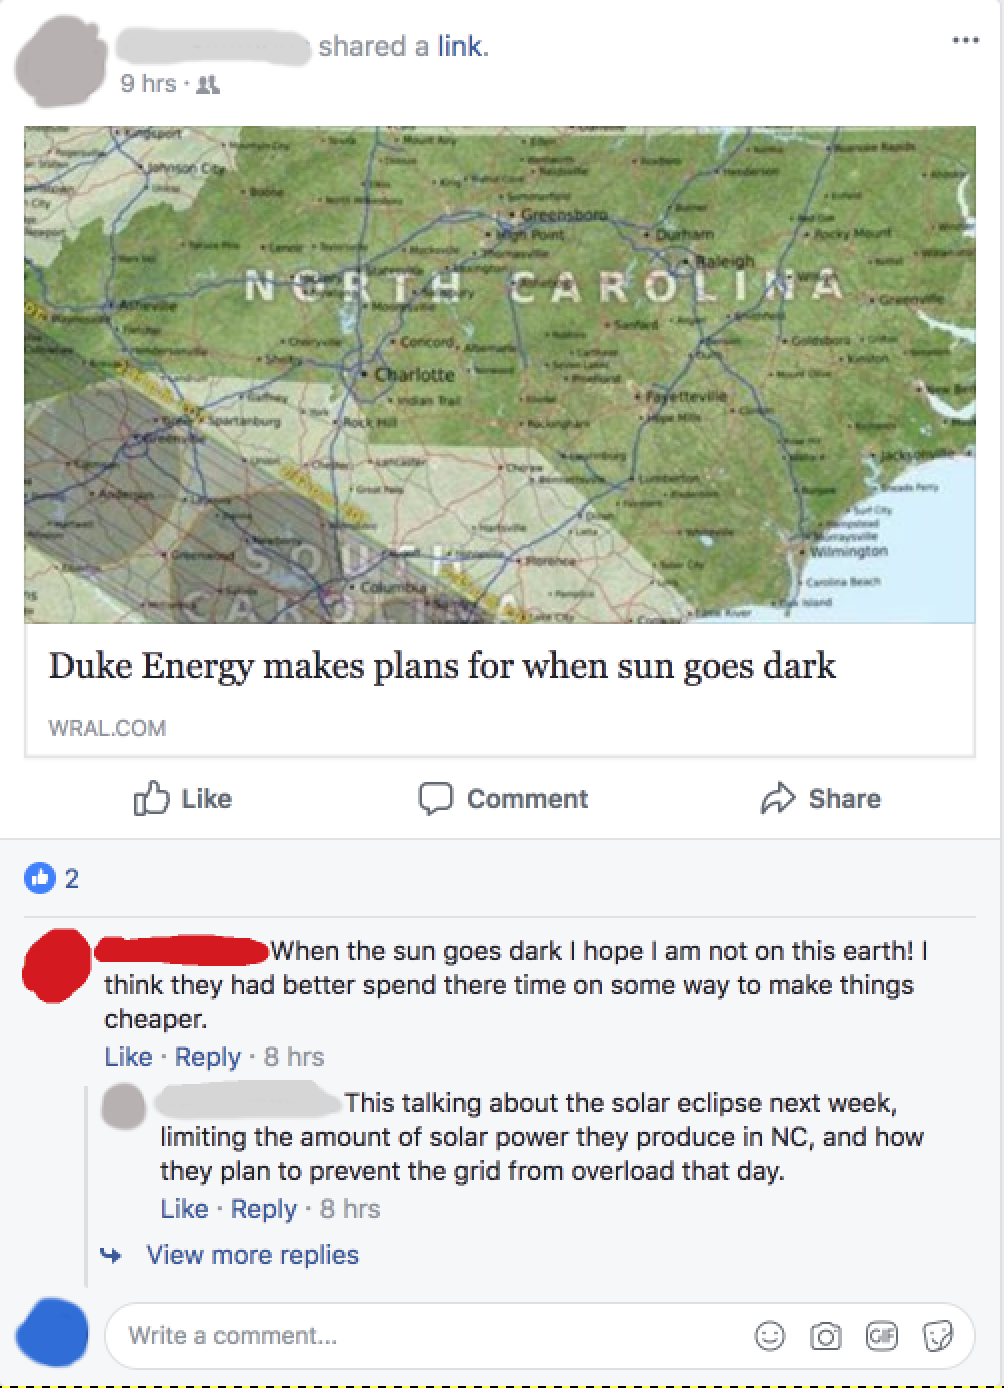 Article about Duke energy planning out their solar power during the eclipse get weird response about the earth falling into darkness.